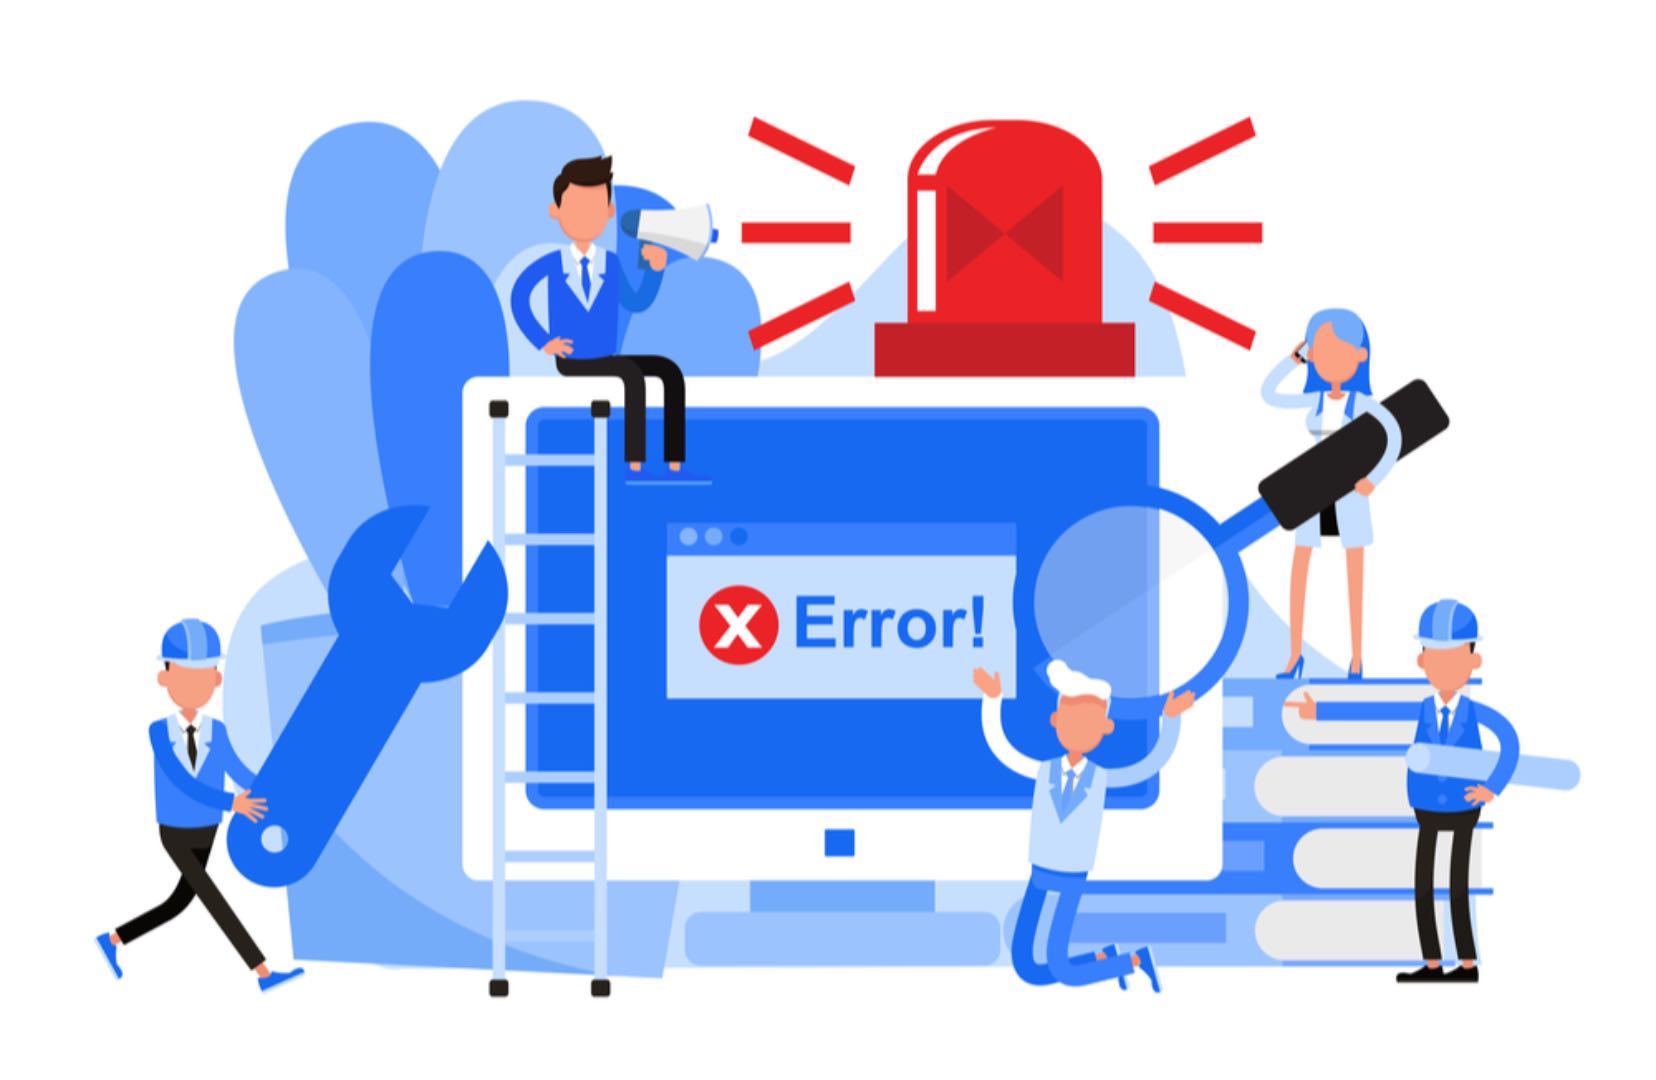 on-page seo errors